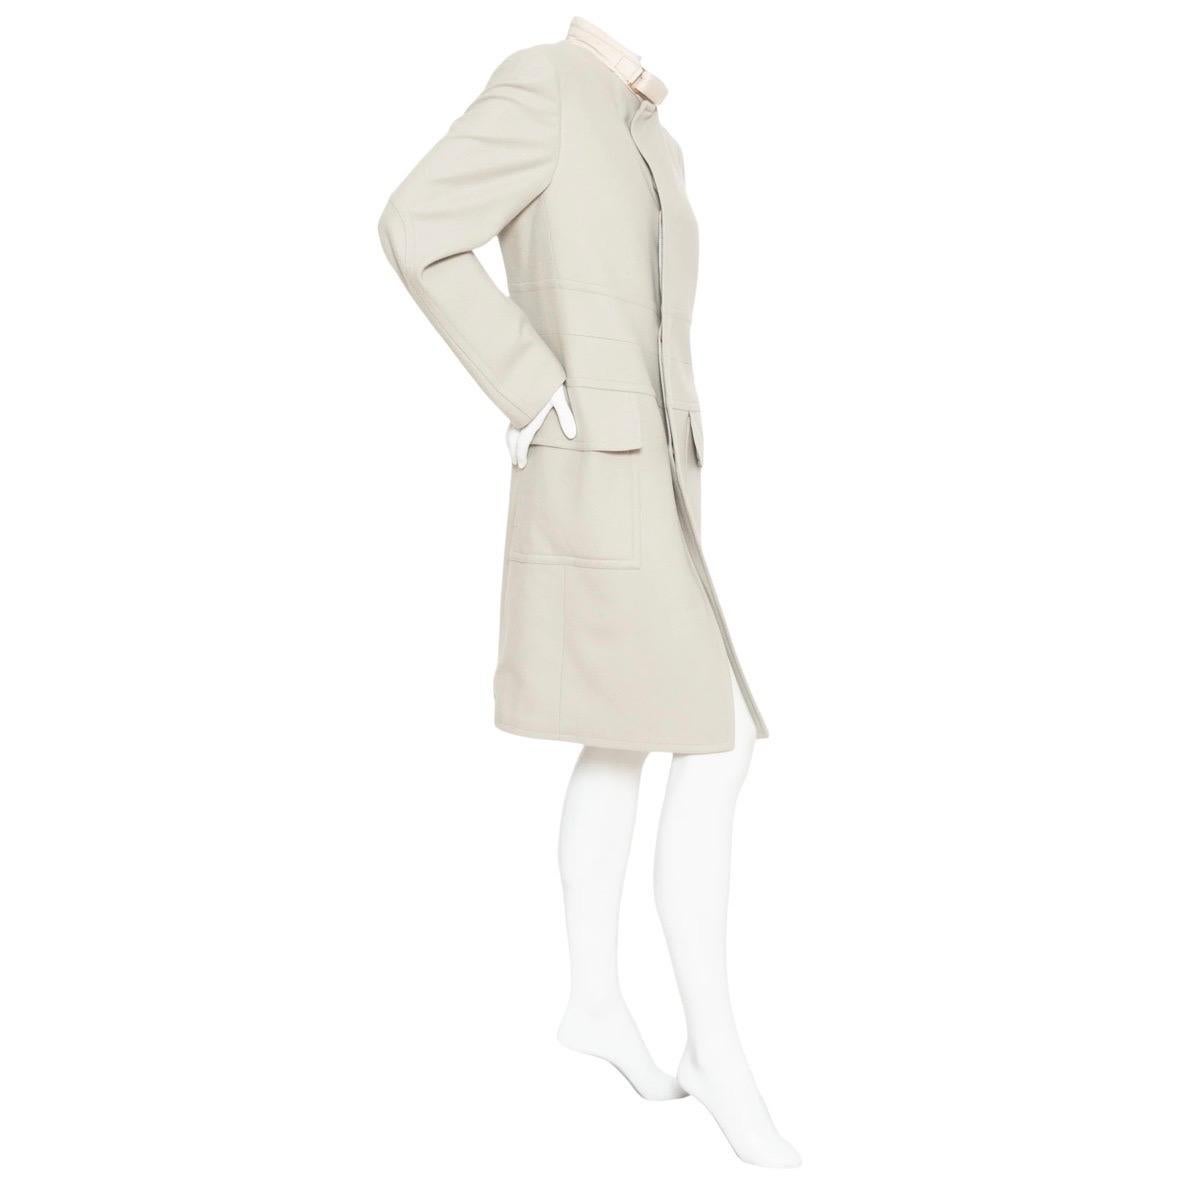 Gucci Cream Cashmere-Blend Leather Collar Coat

Natural/Cream/Light Gray
High neck with leather collar and gold-tone buckle
Hidden button front
Front flap pockets
Banded waist detailing
Back vent
Interior pocket with button closure
Made in Italy
97%